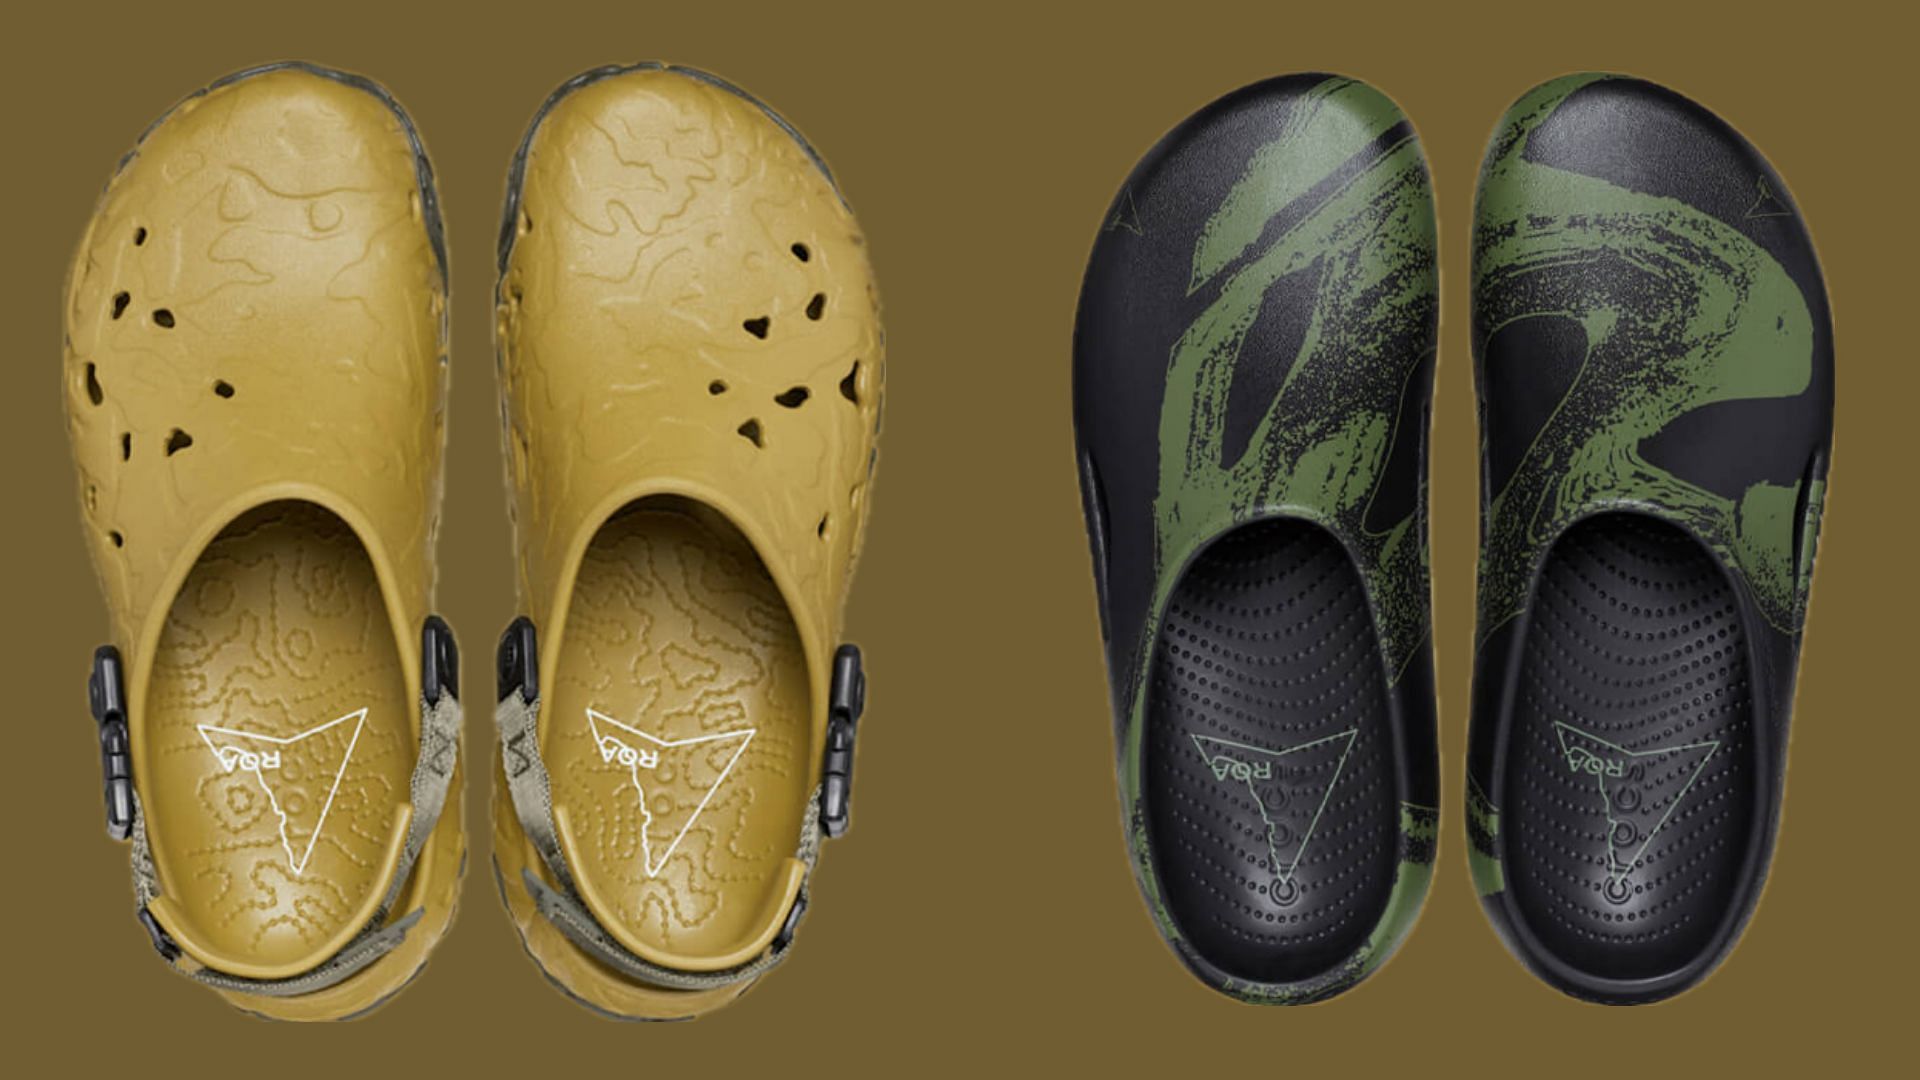 Take a look at the uppers (Image via Crocs)